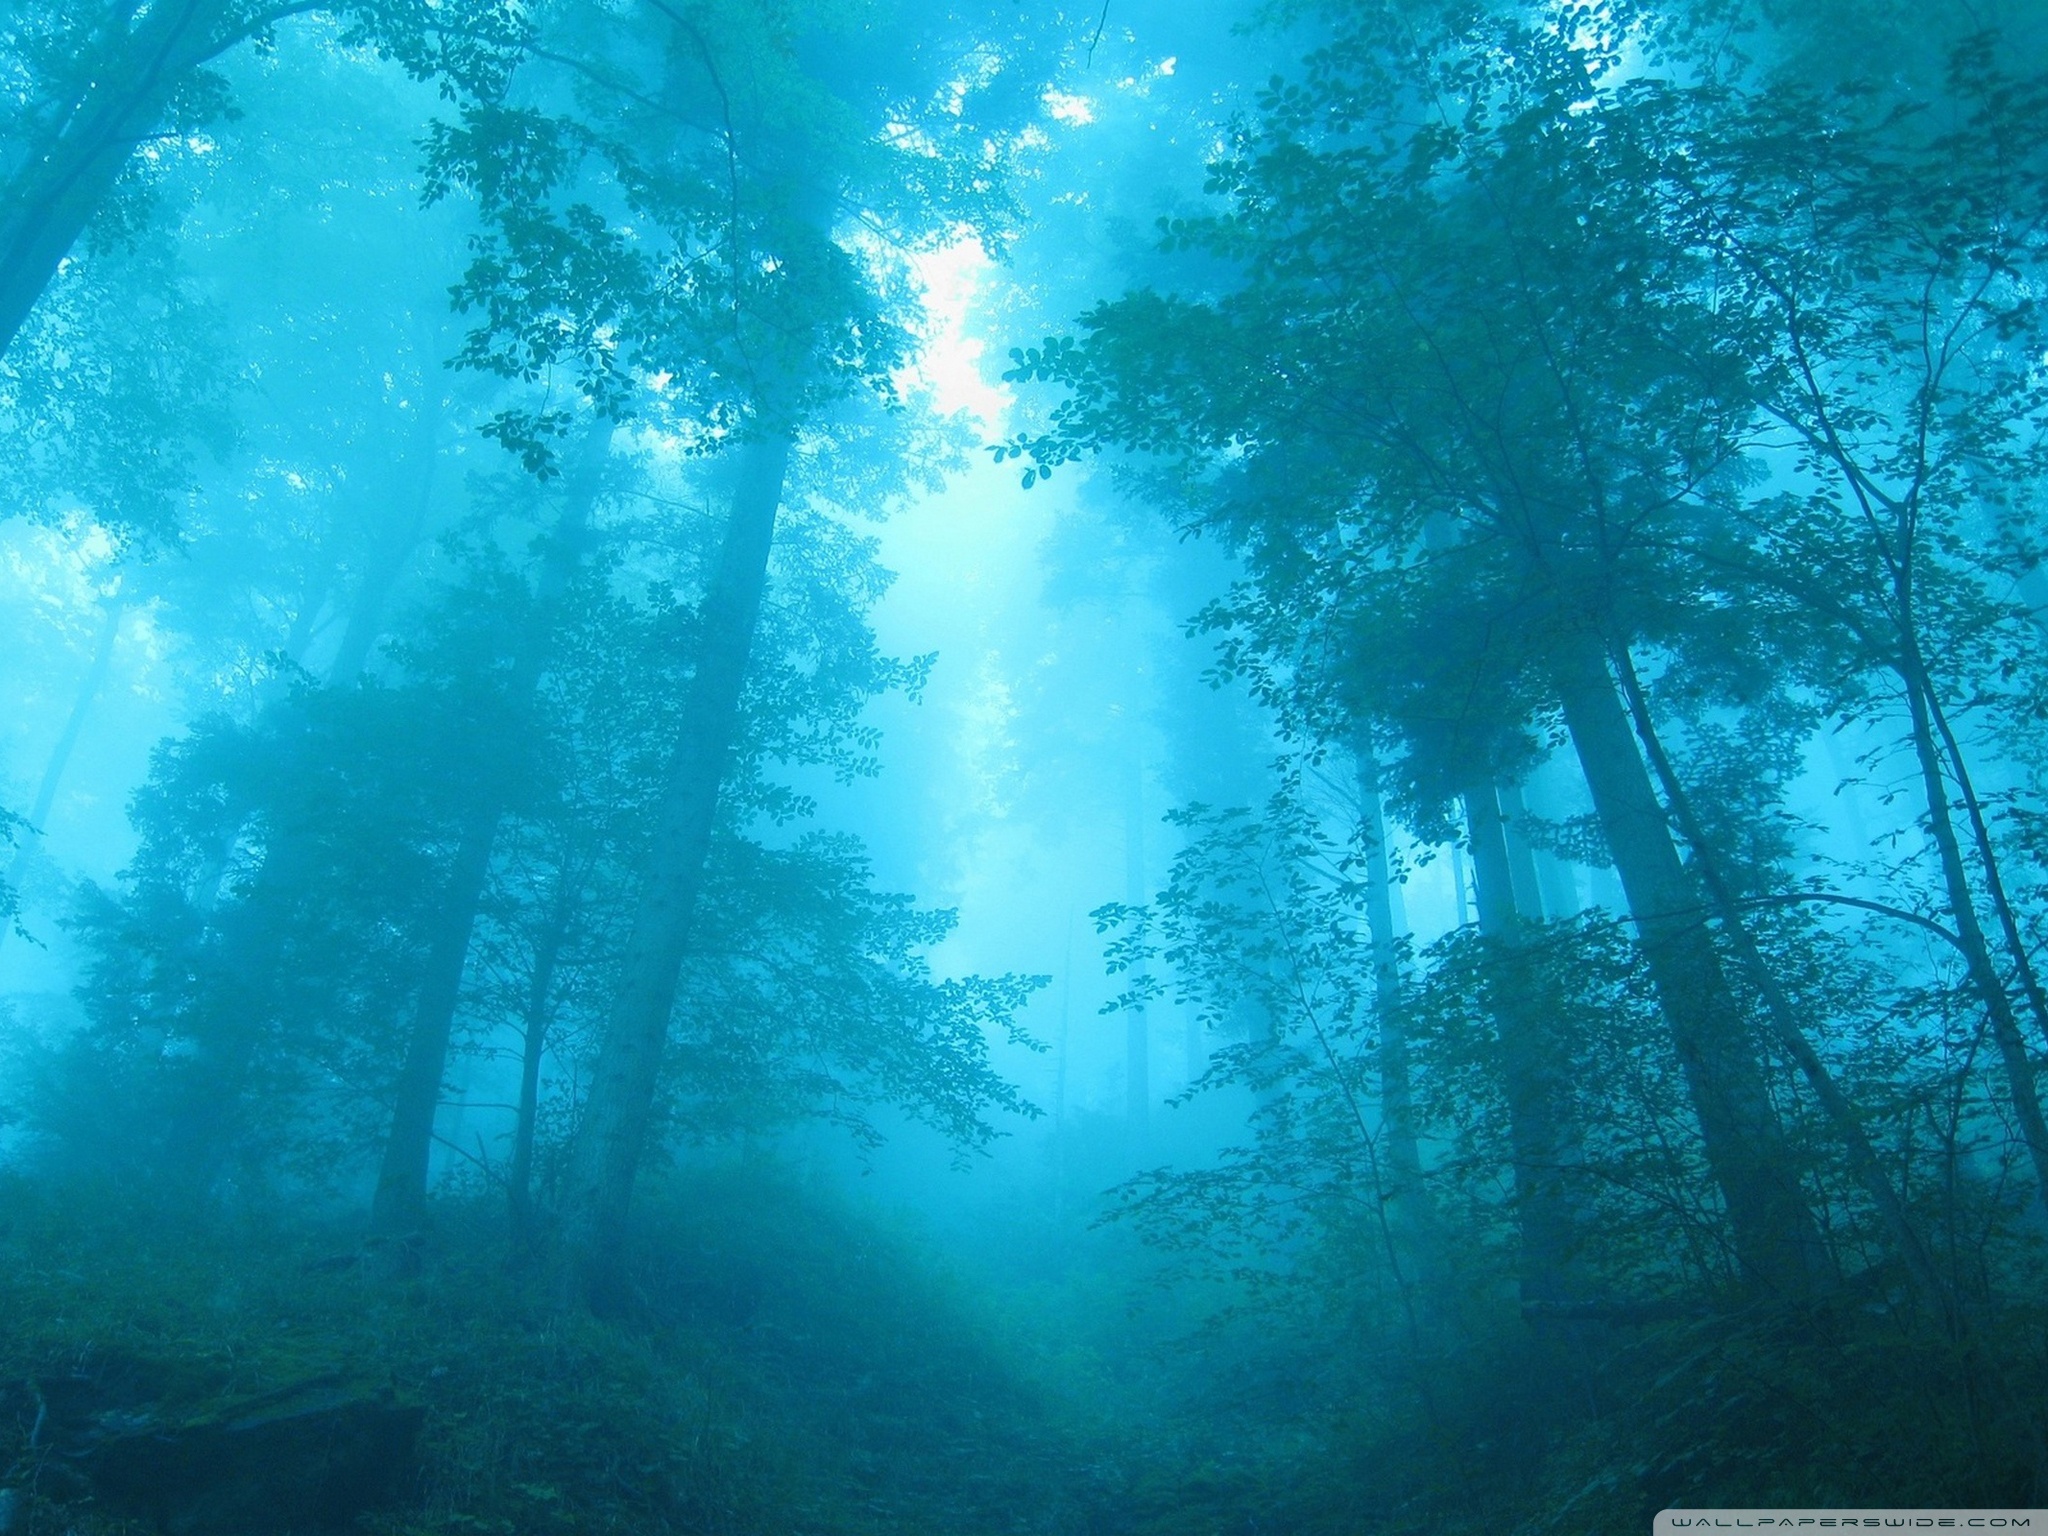 The blue forest wallpaper 2560x1600 - Foggy forest